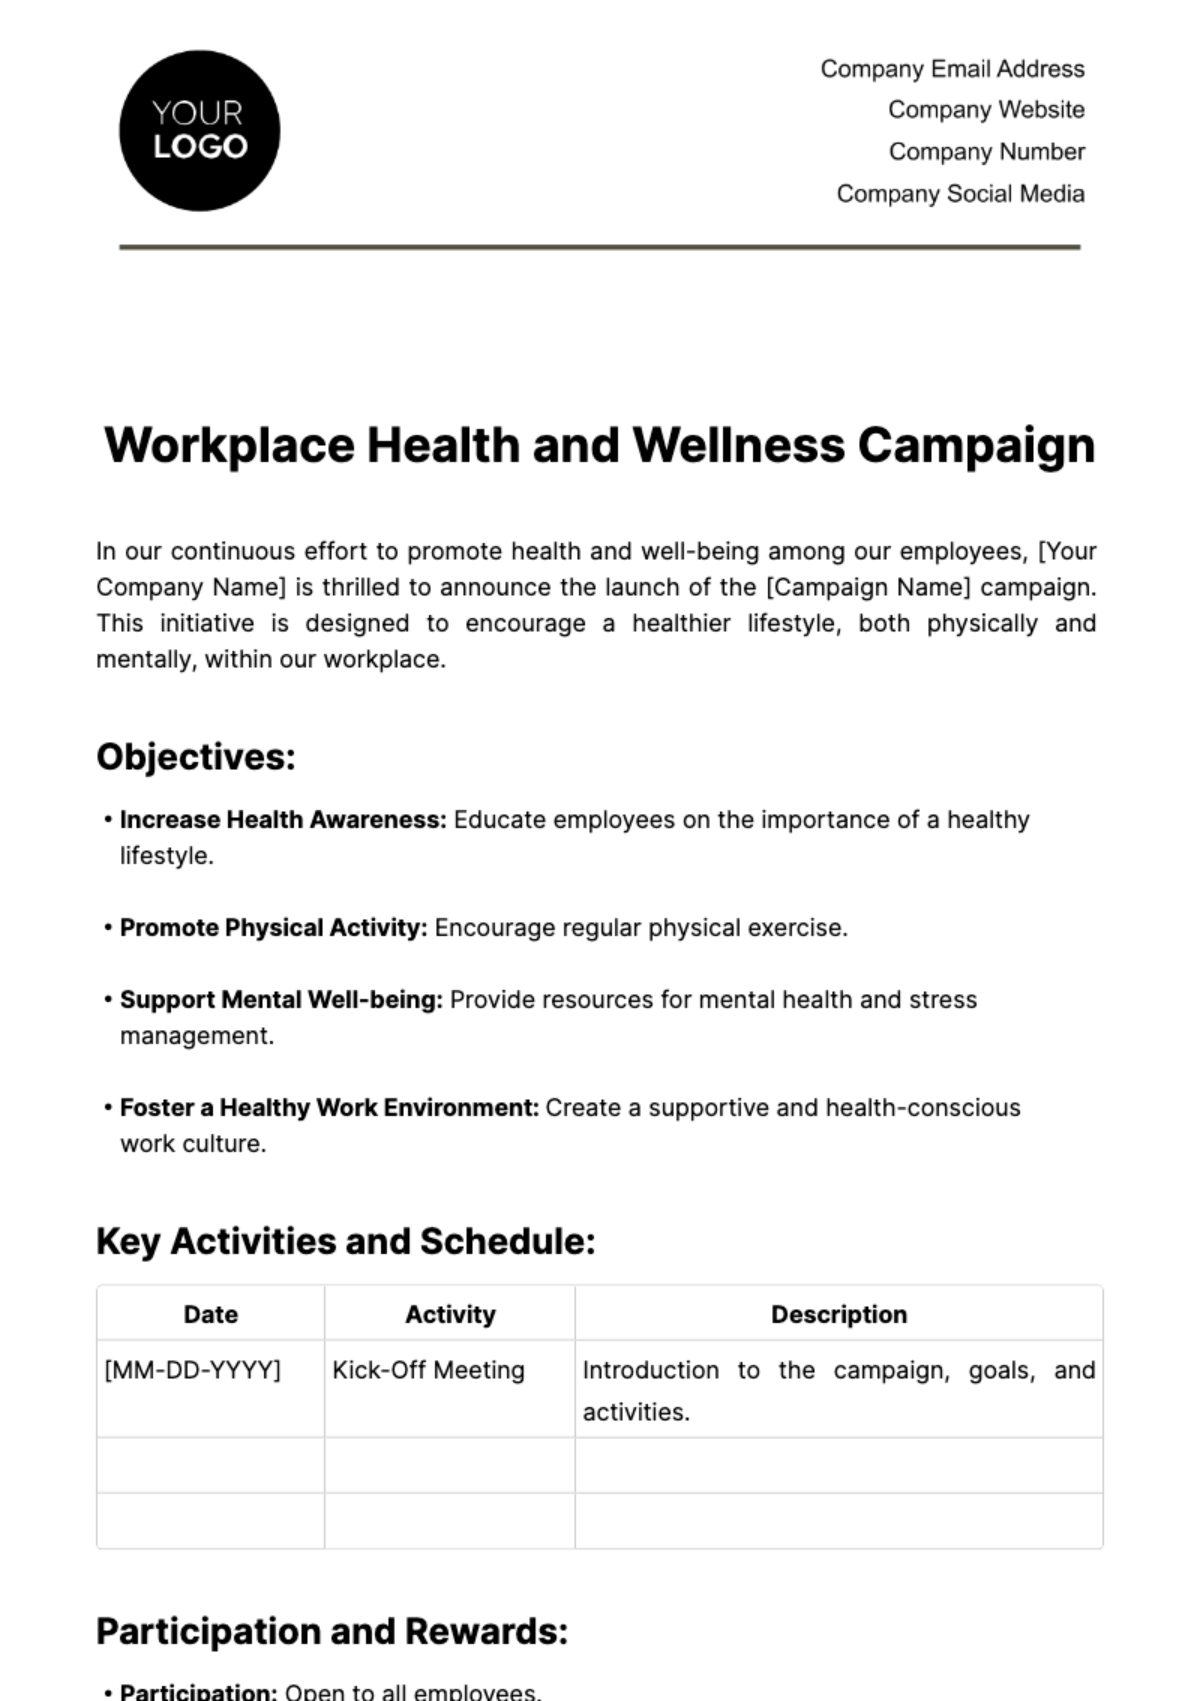 Workplace Health and Wellness Campaign Template